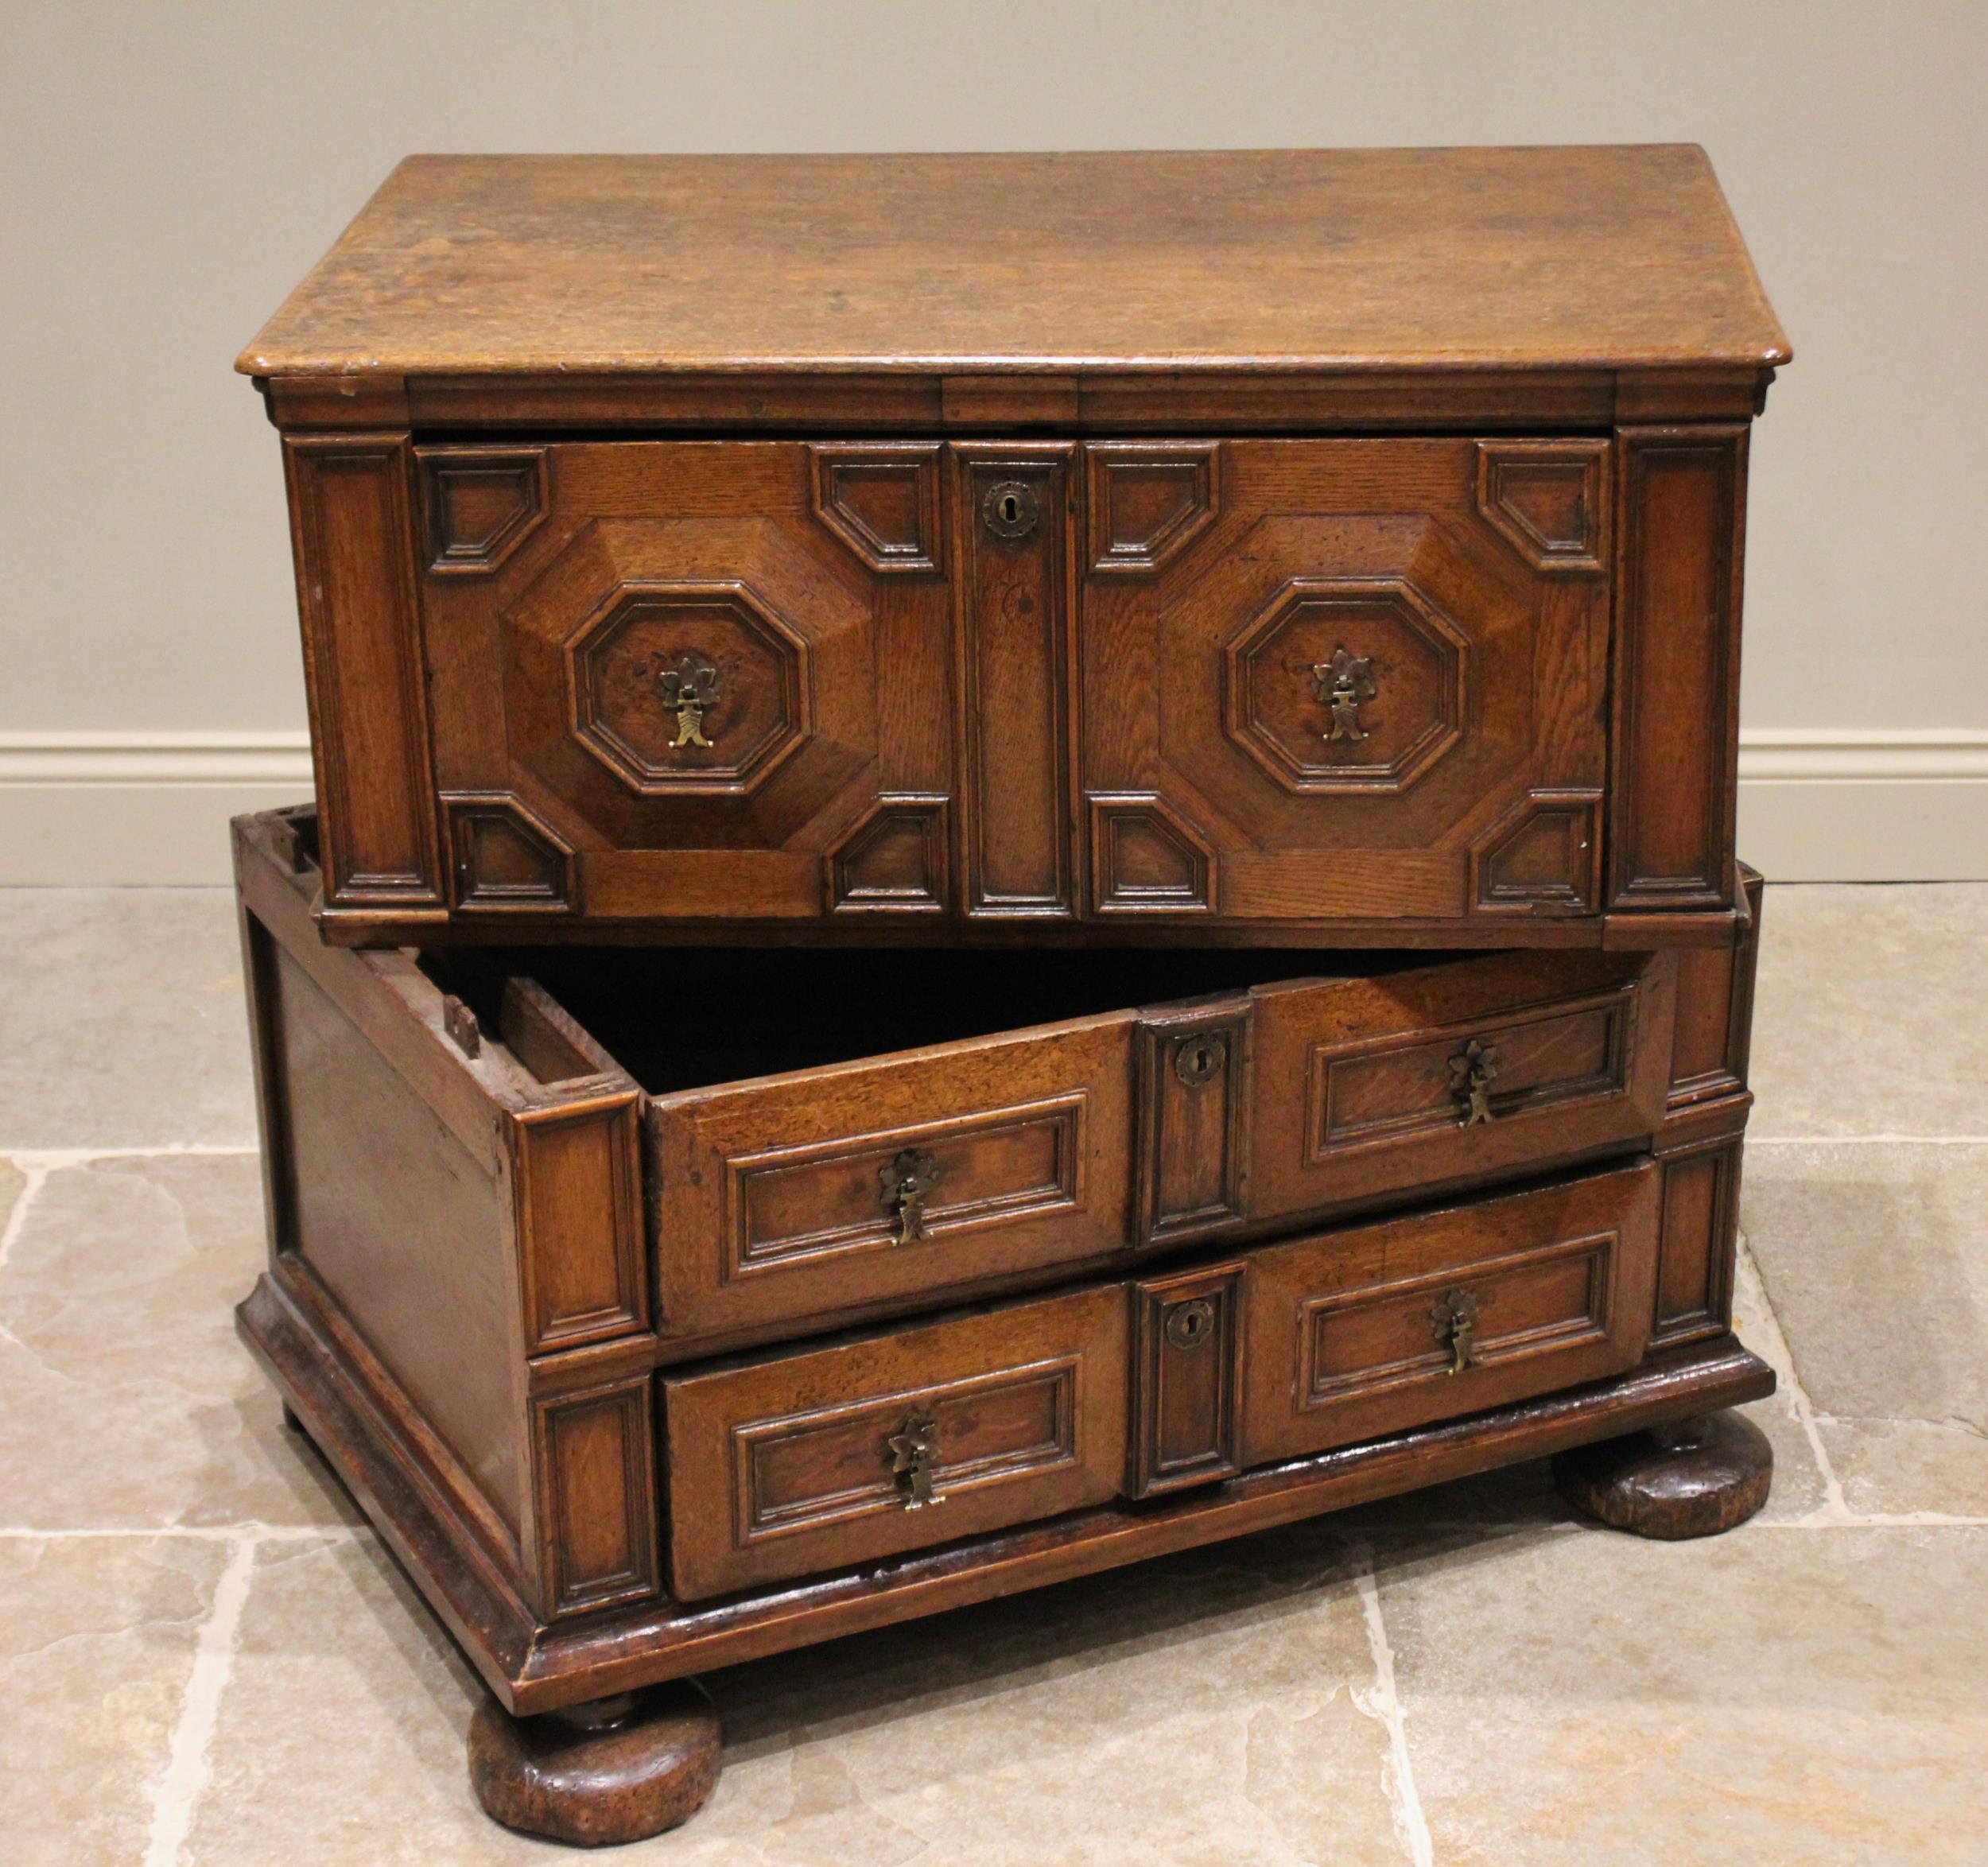 A late 17th/early 18th century two section oak chest of drawers, the upper section with a - Image 3 of 3